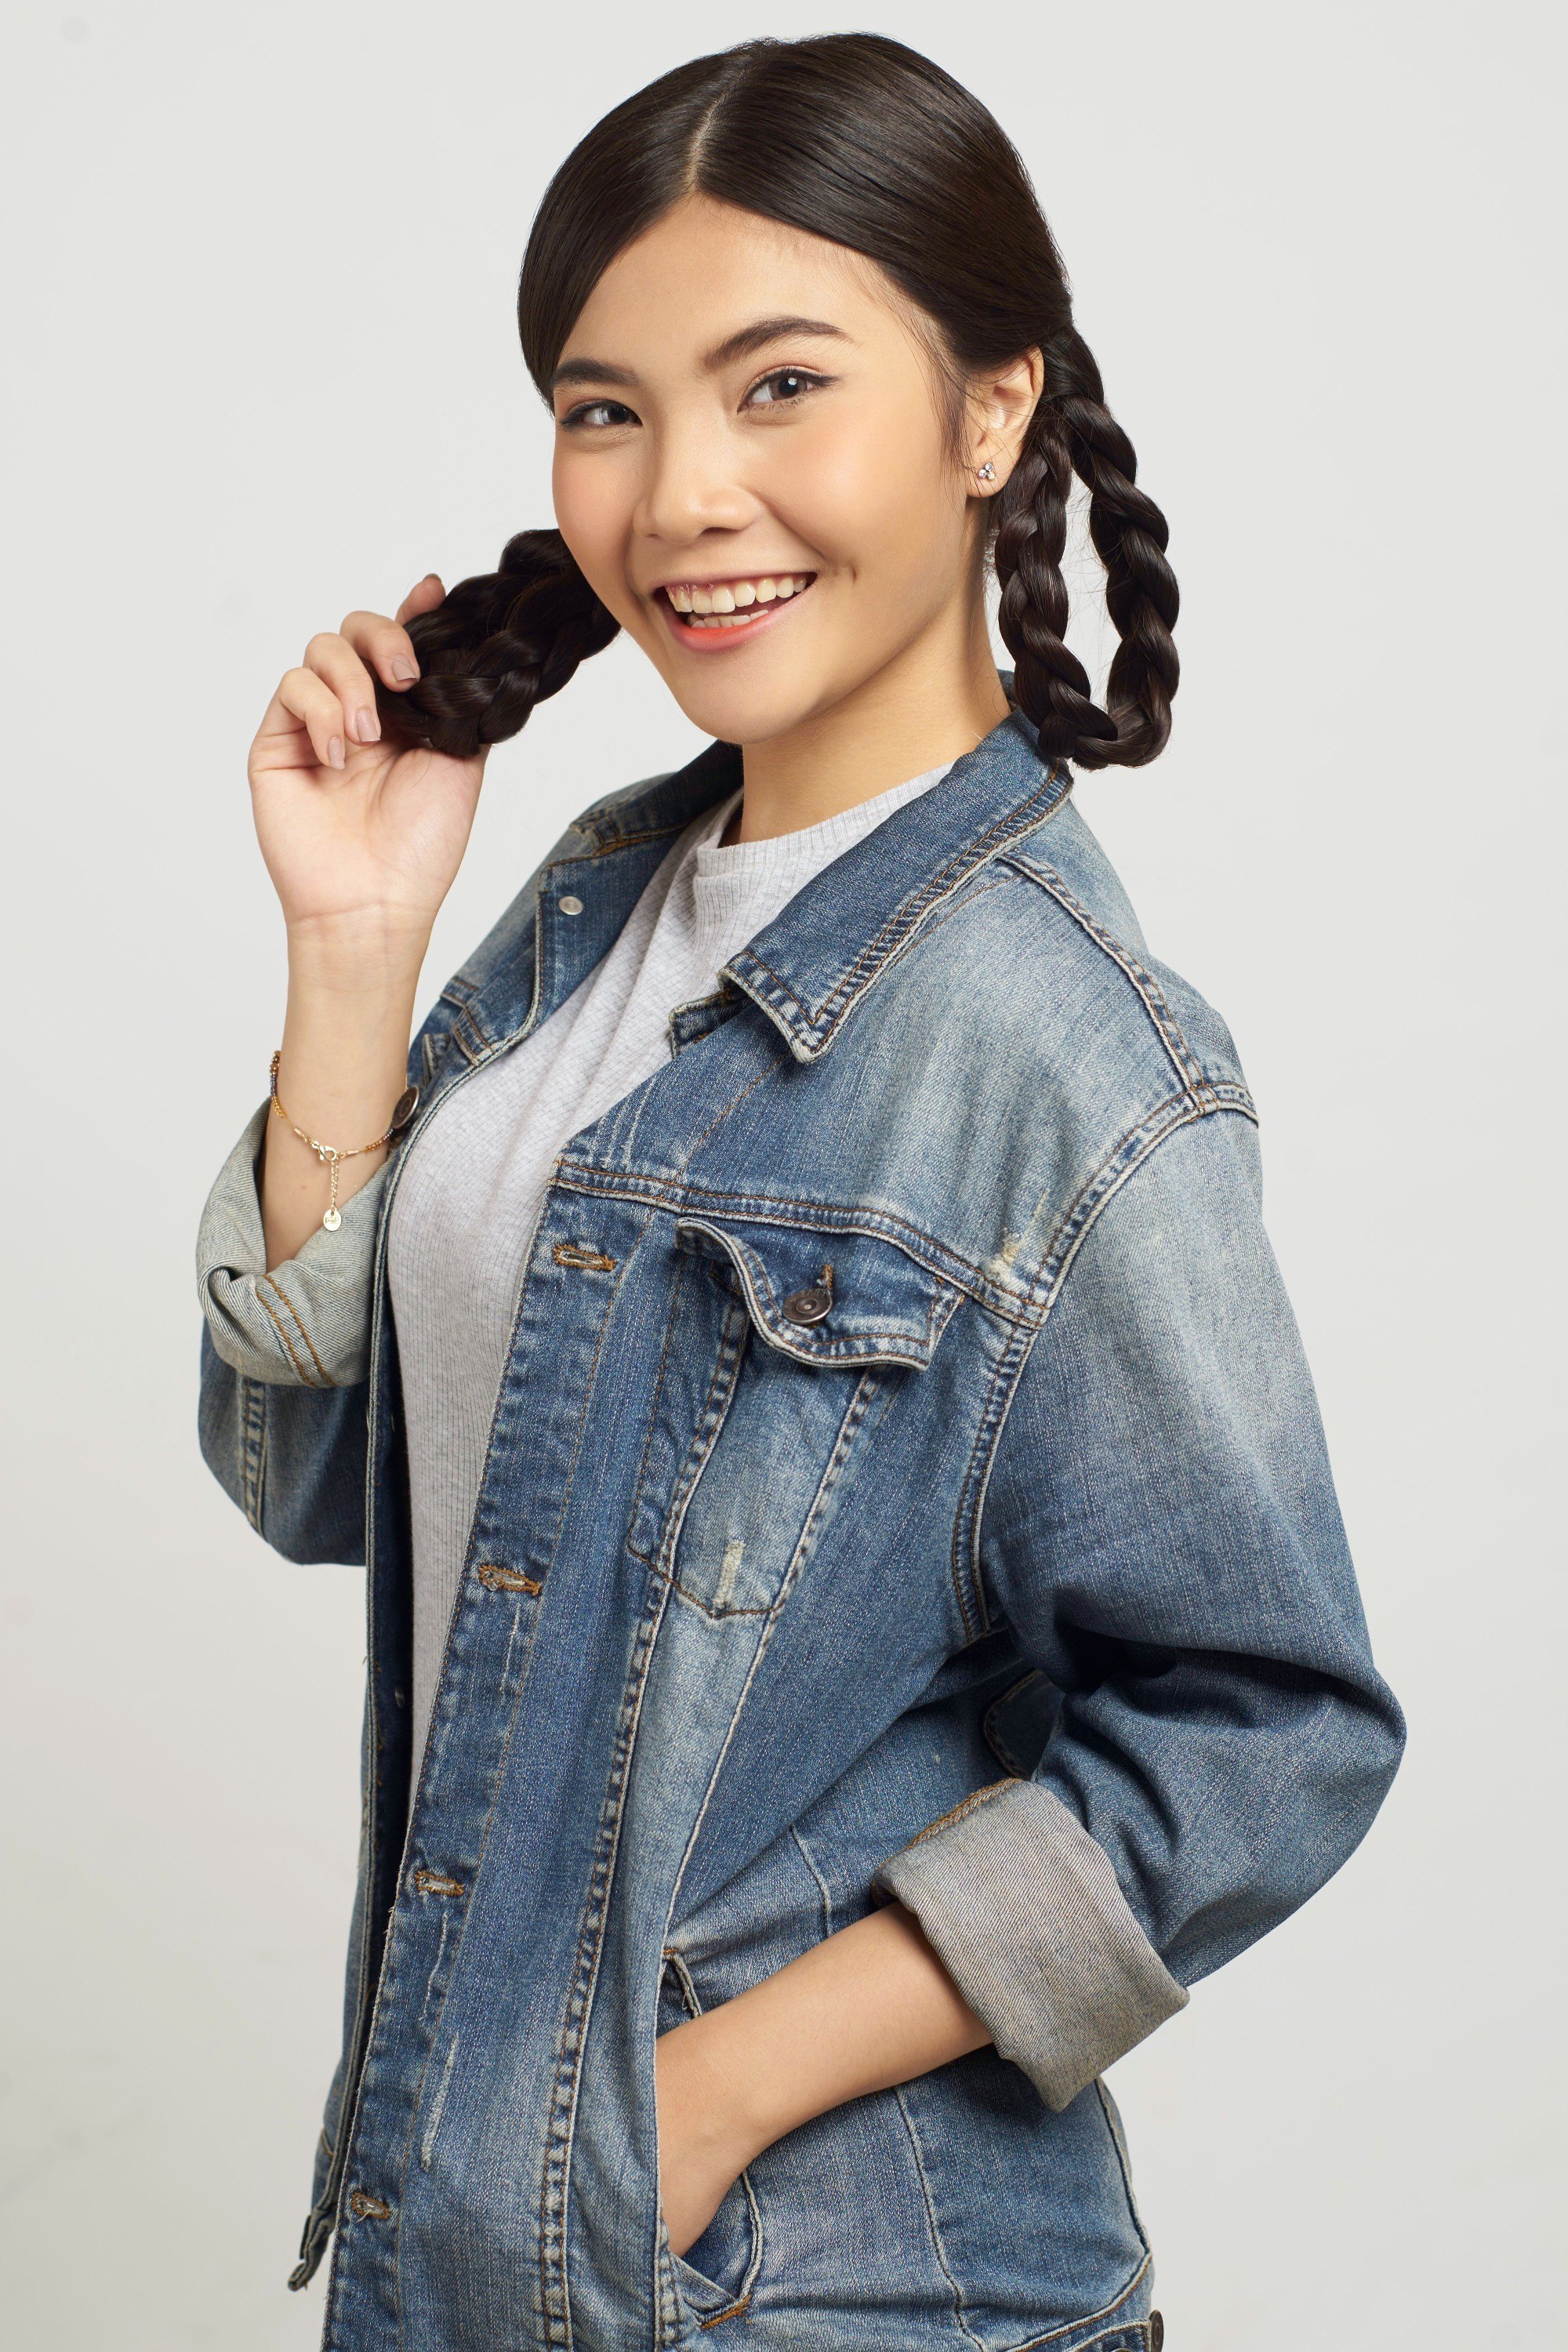 Asian girl is holding one of her looped braids